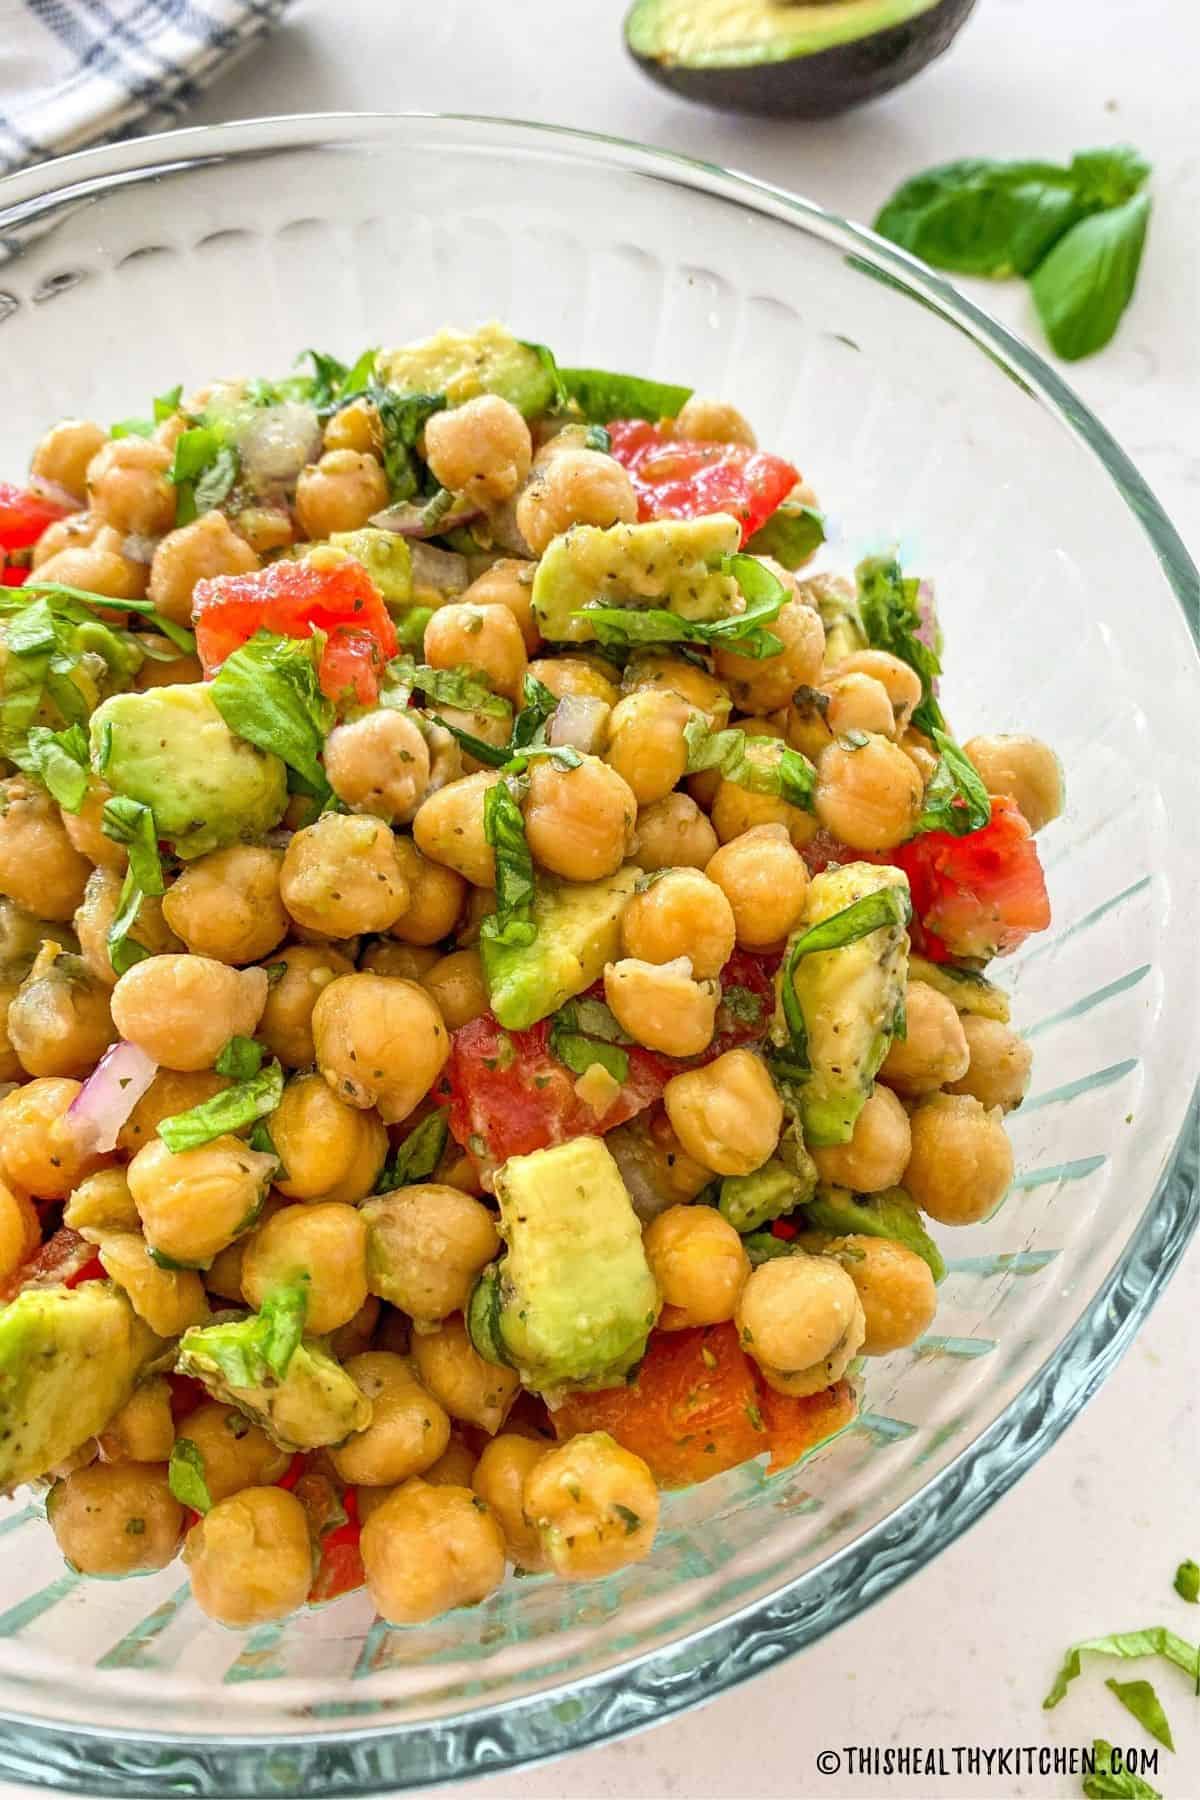 Glass bowl filled with chickpea salad.